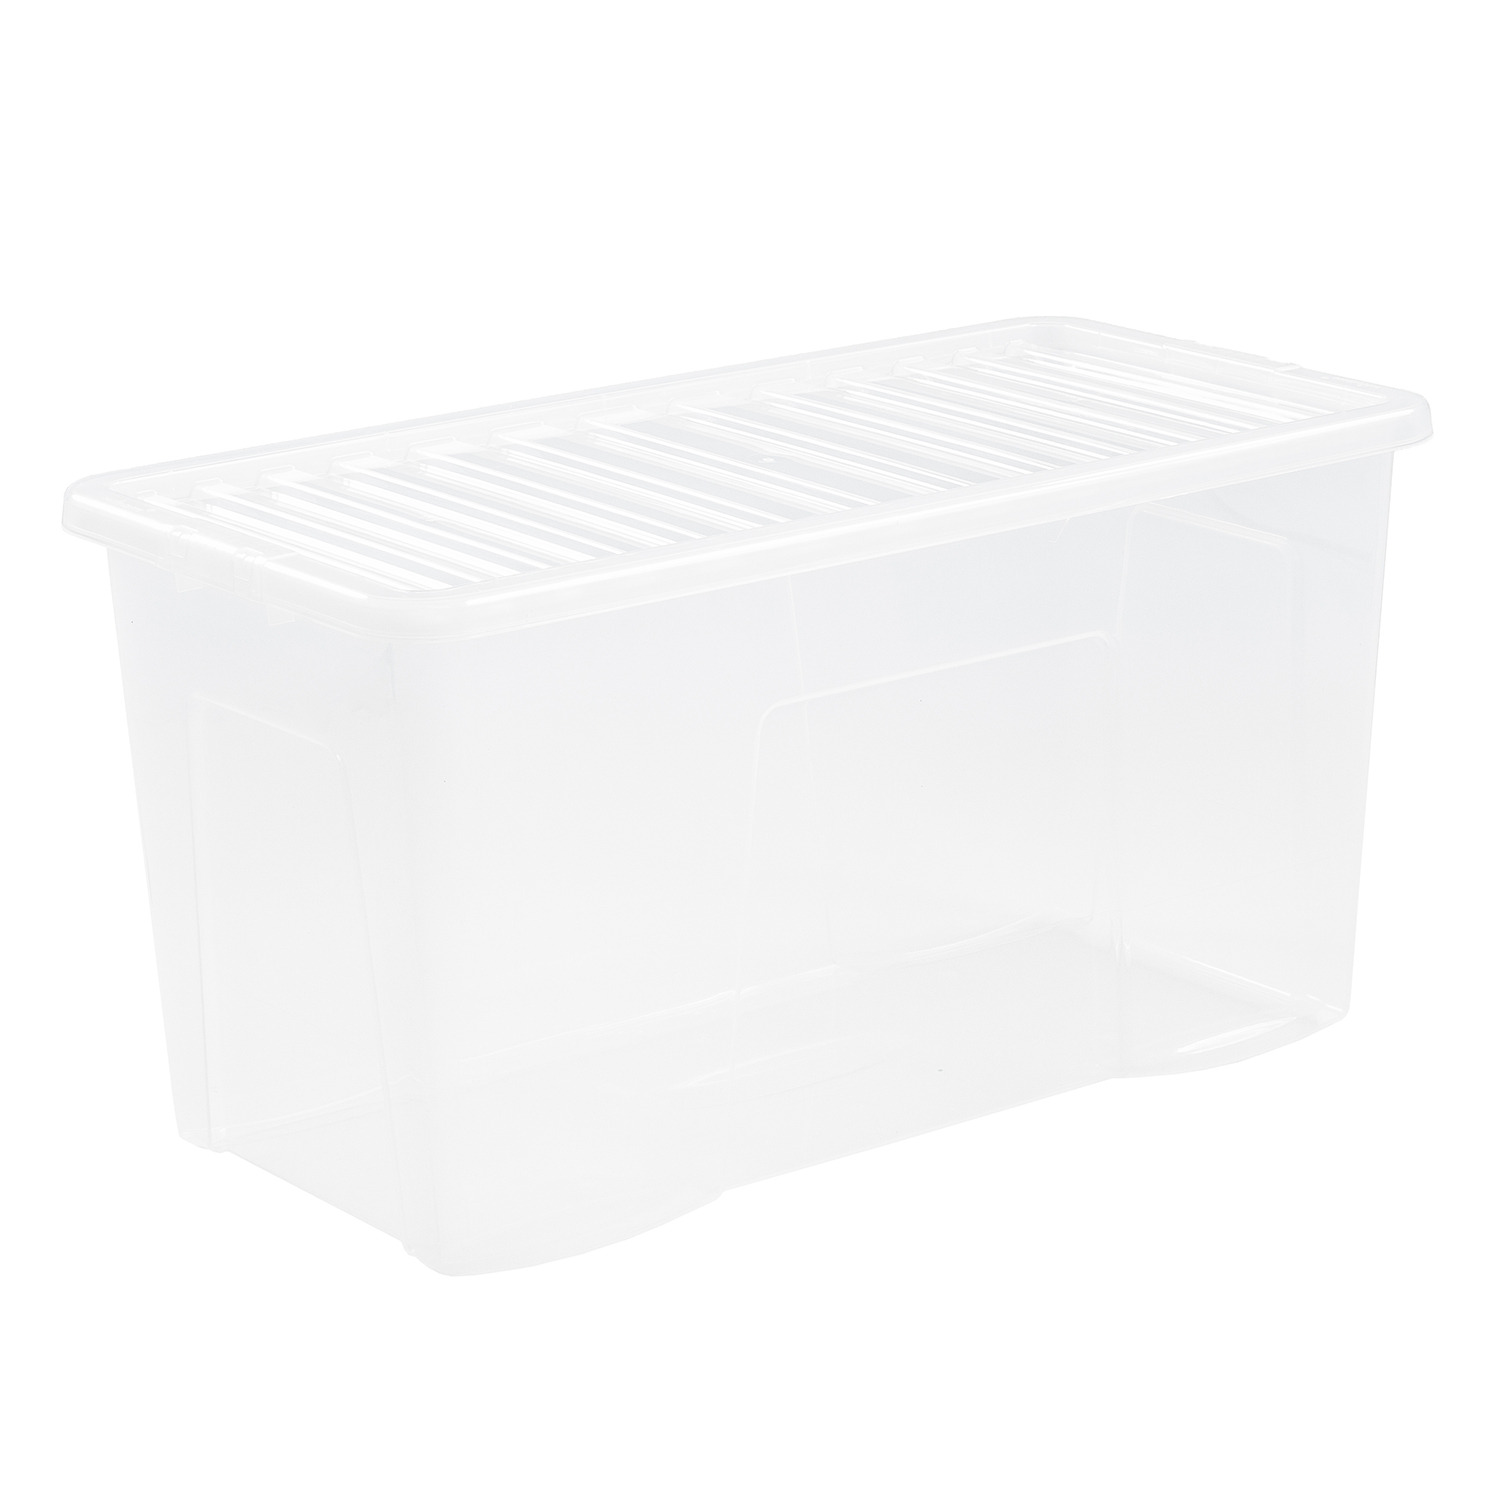 Wham 110L Clear Plastic Storage Box with Lid Image 1